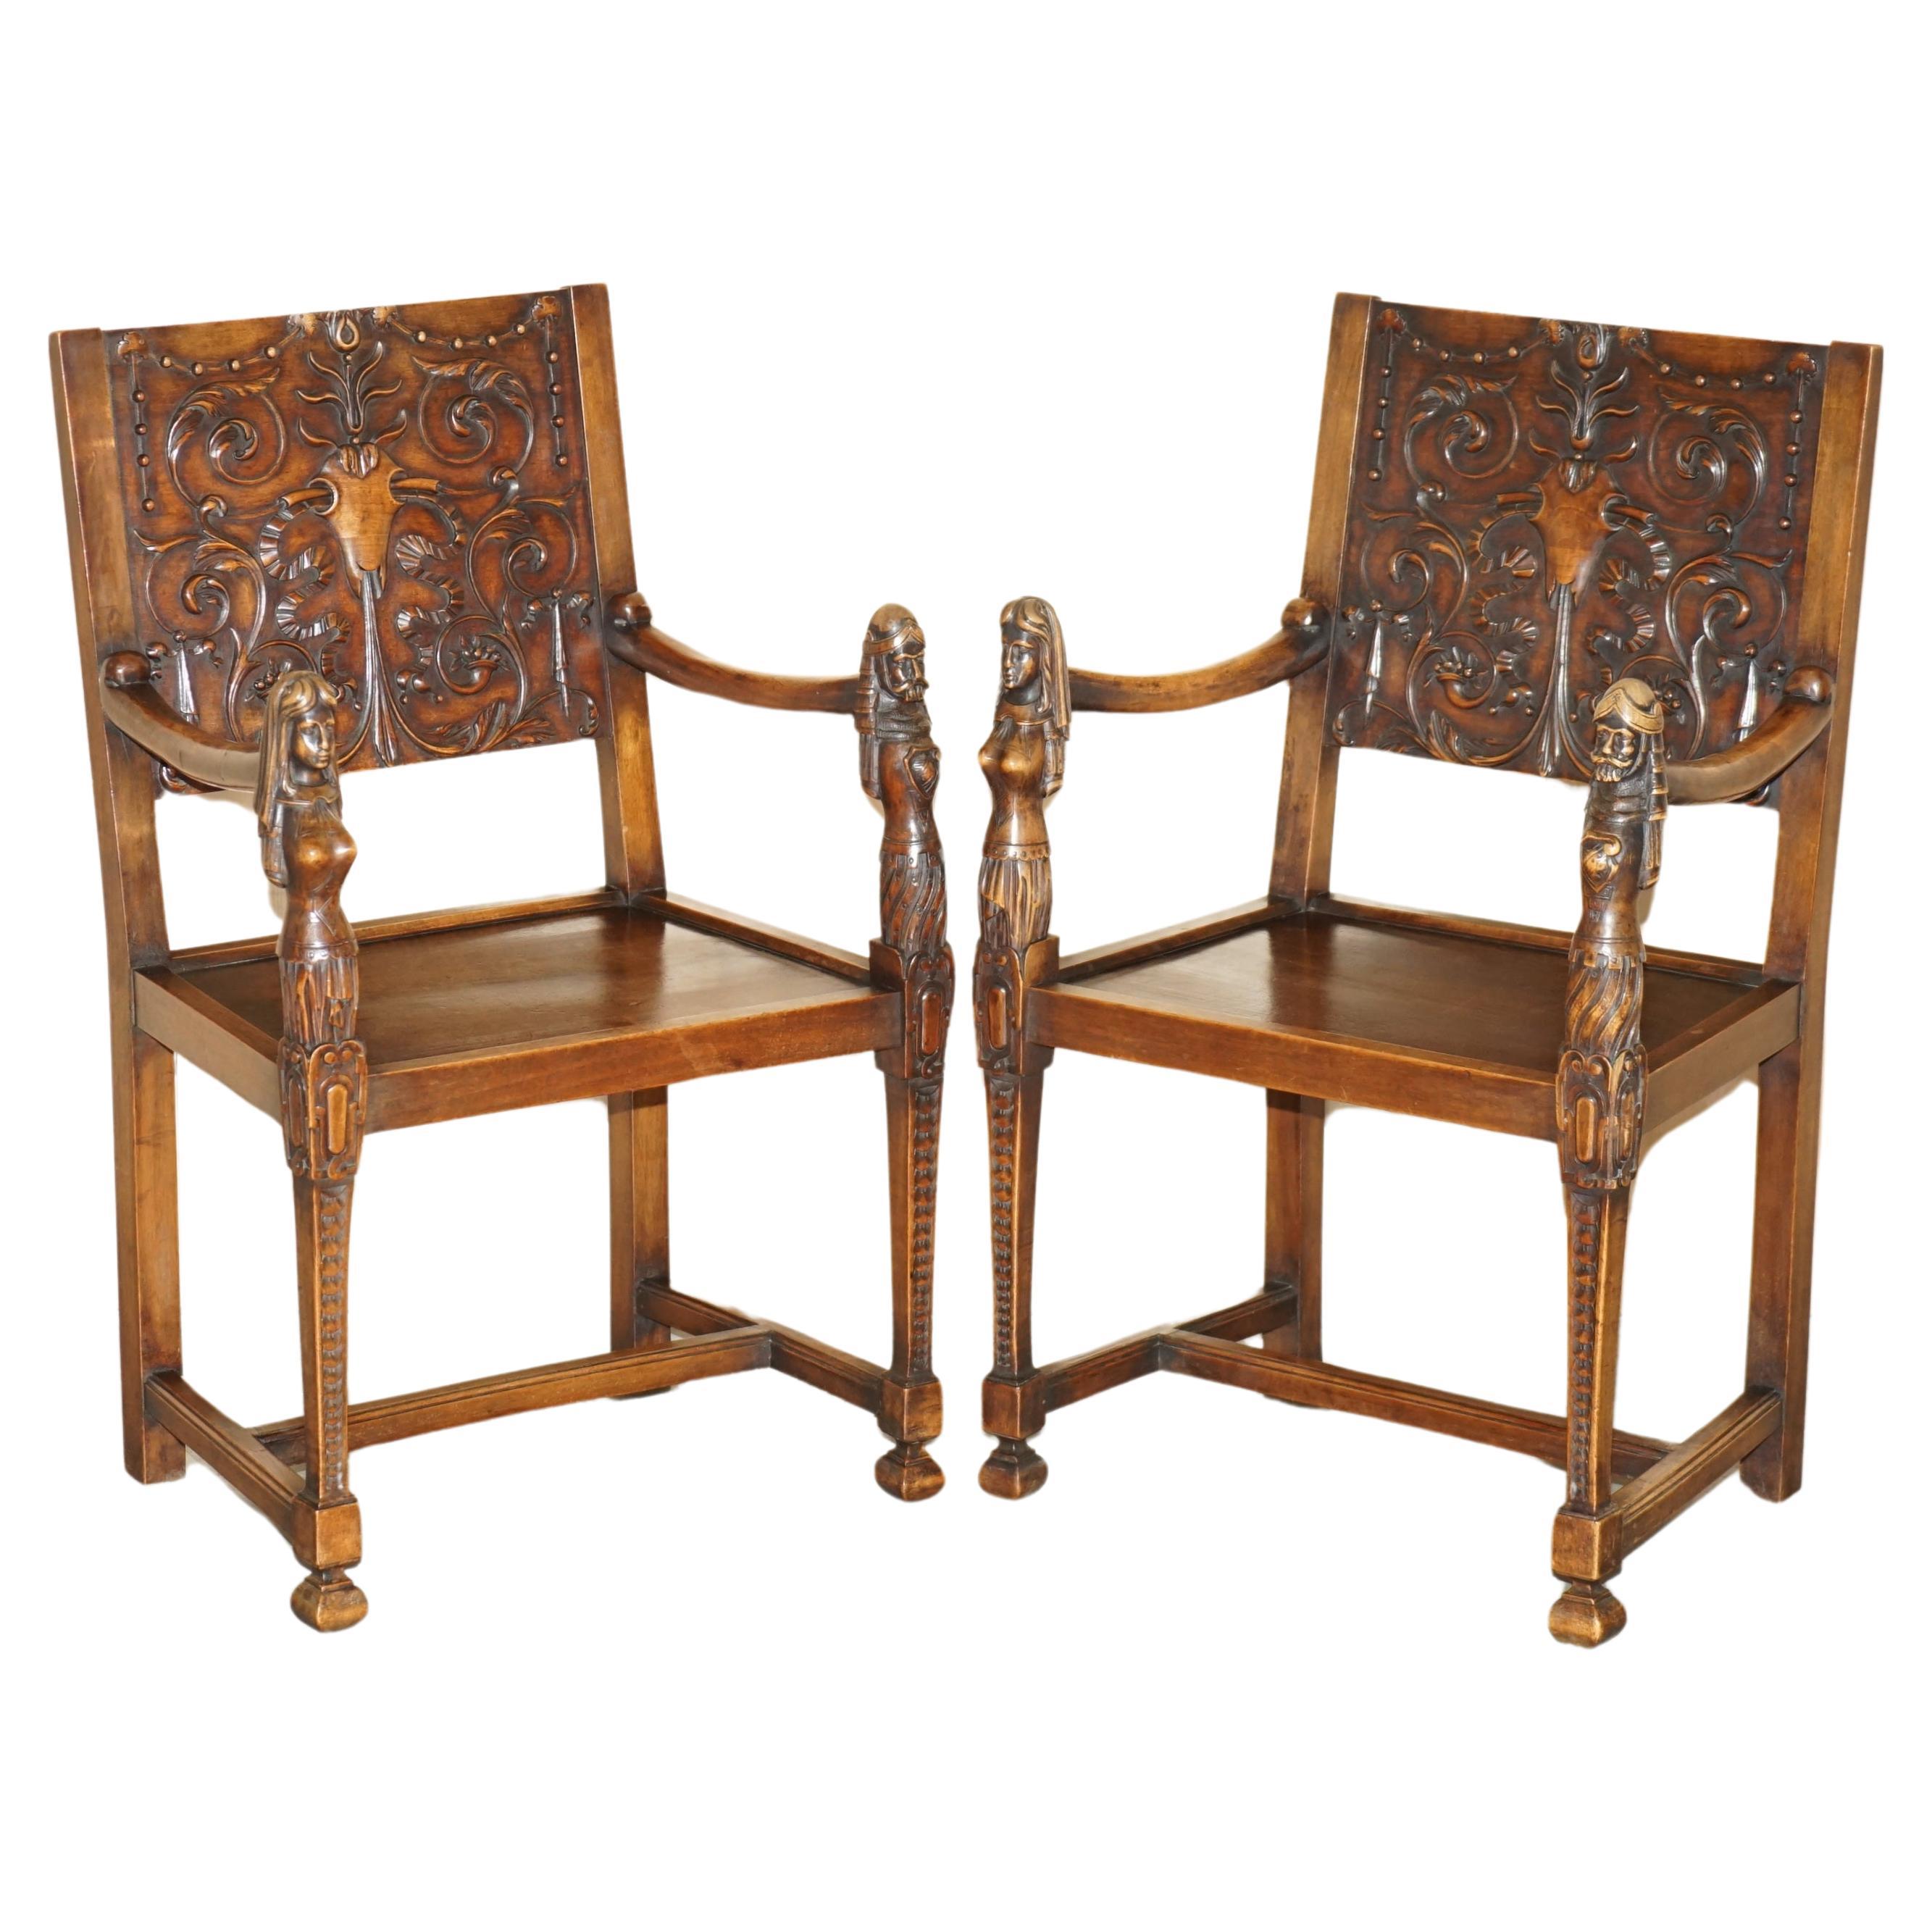 PAIR OF ORNATELY CARved NEO-GOTHIC SOLiD WALNUT 19TH CENTURY CEREMONY ARMCHAIRS im Angebot